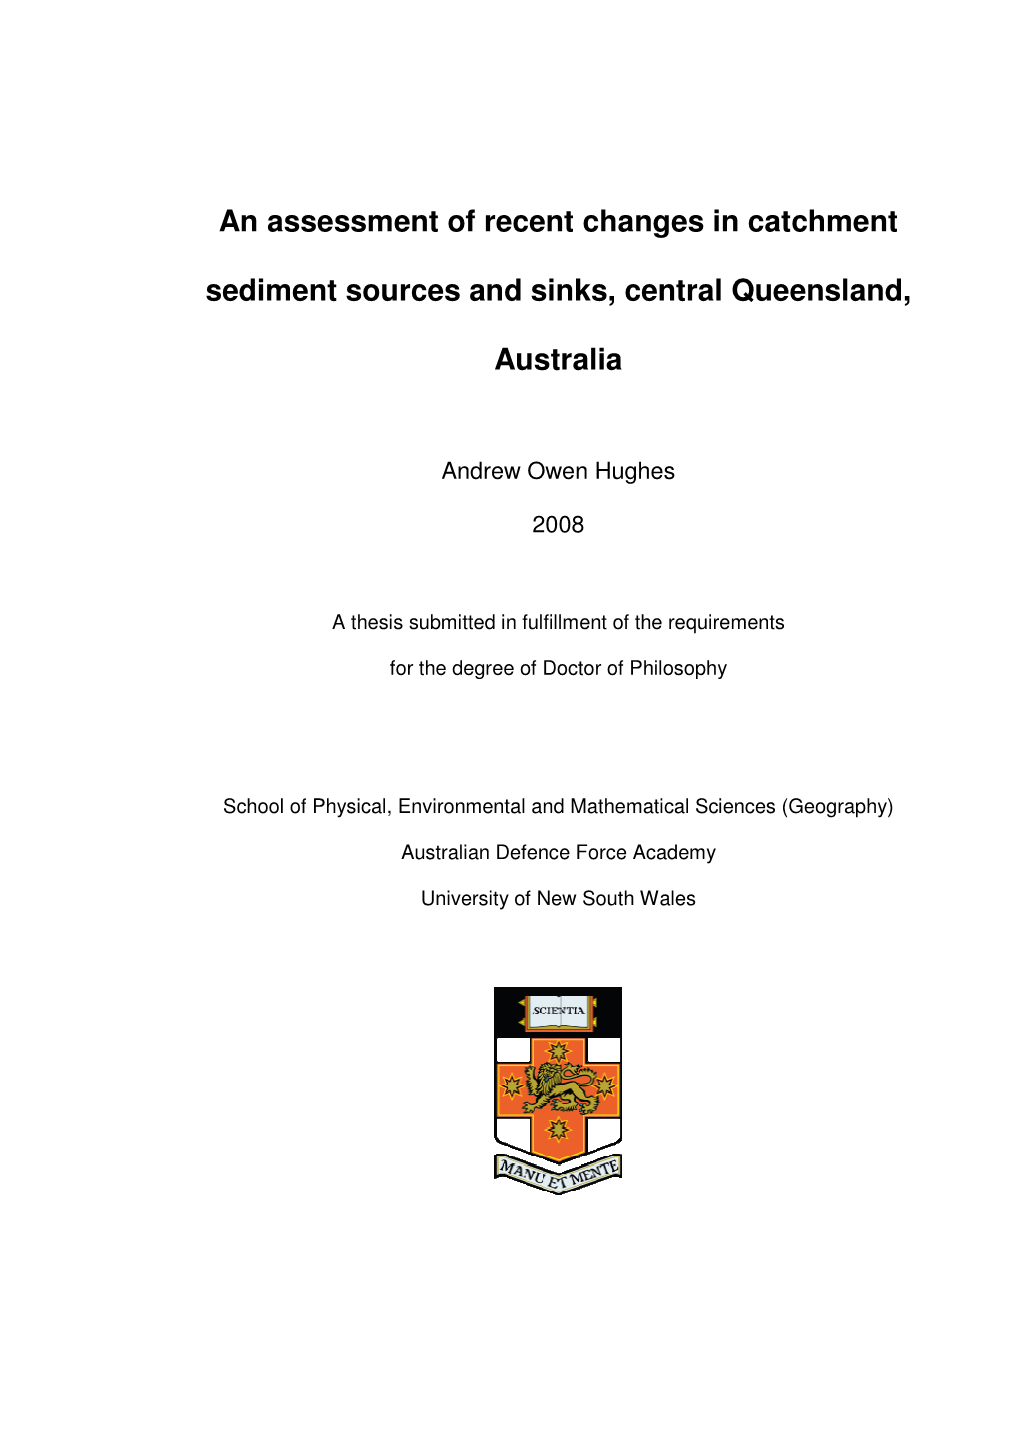 An Assessment of Recent Changes in Catchment Sediment Sources and Sinks, Central Queensland